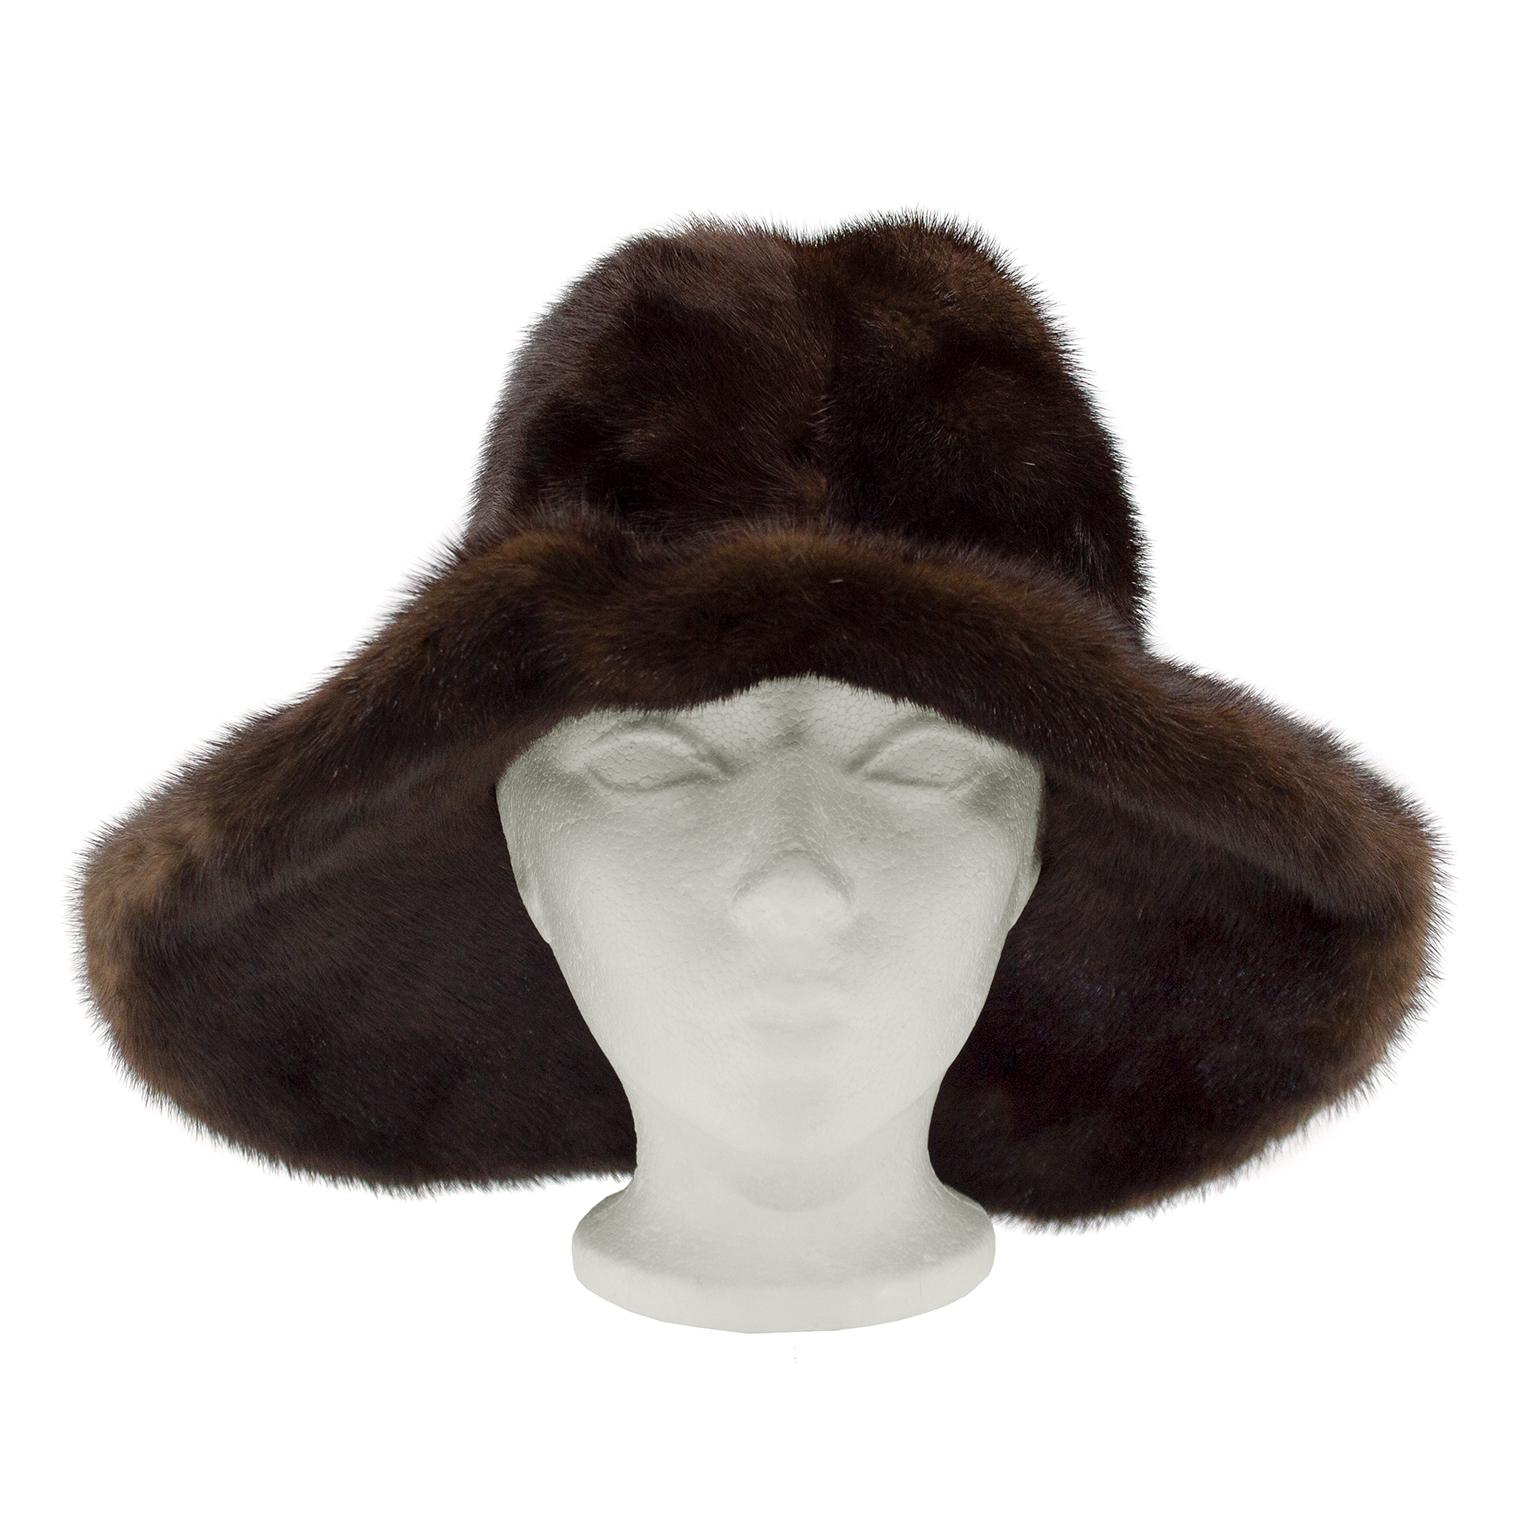 Very chic 1970s brown mink wide brim hat. Excellent vintage condition. Fits average size. Very Boho chic. Brim is pliable can be worn turned up or down.